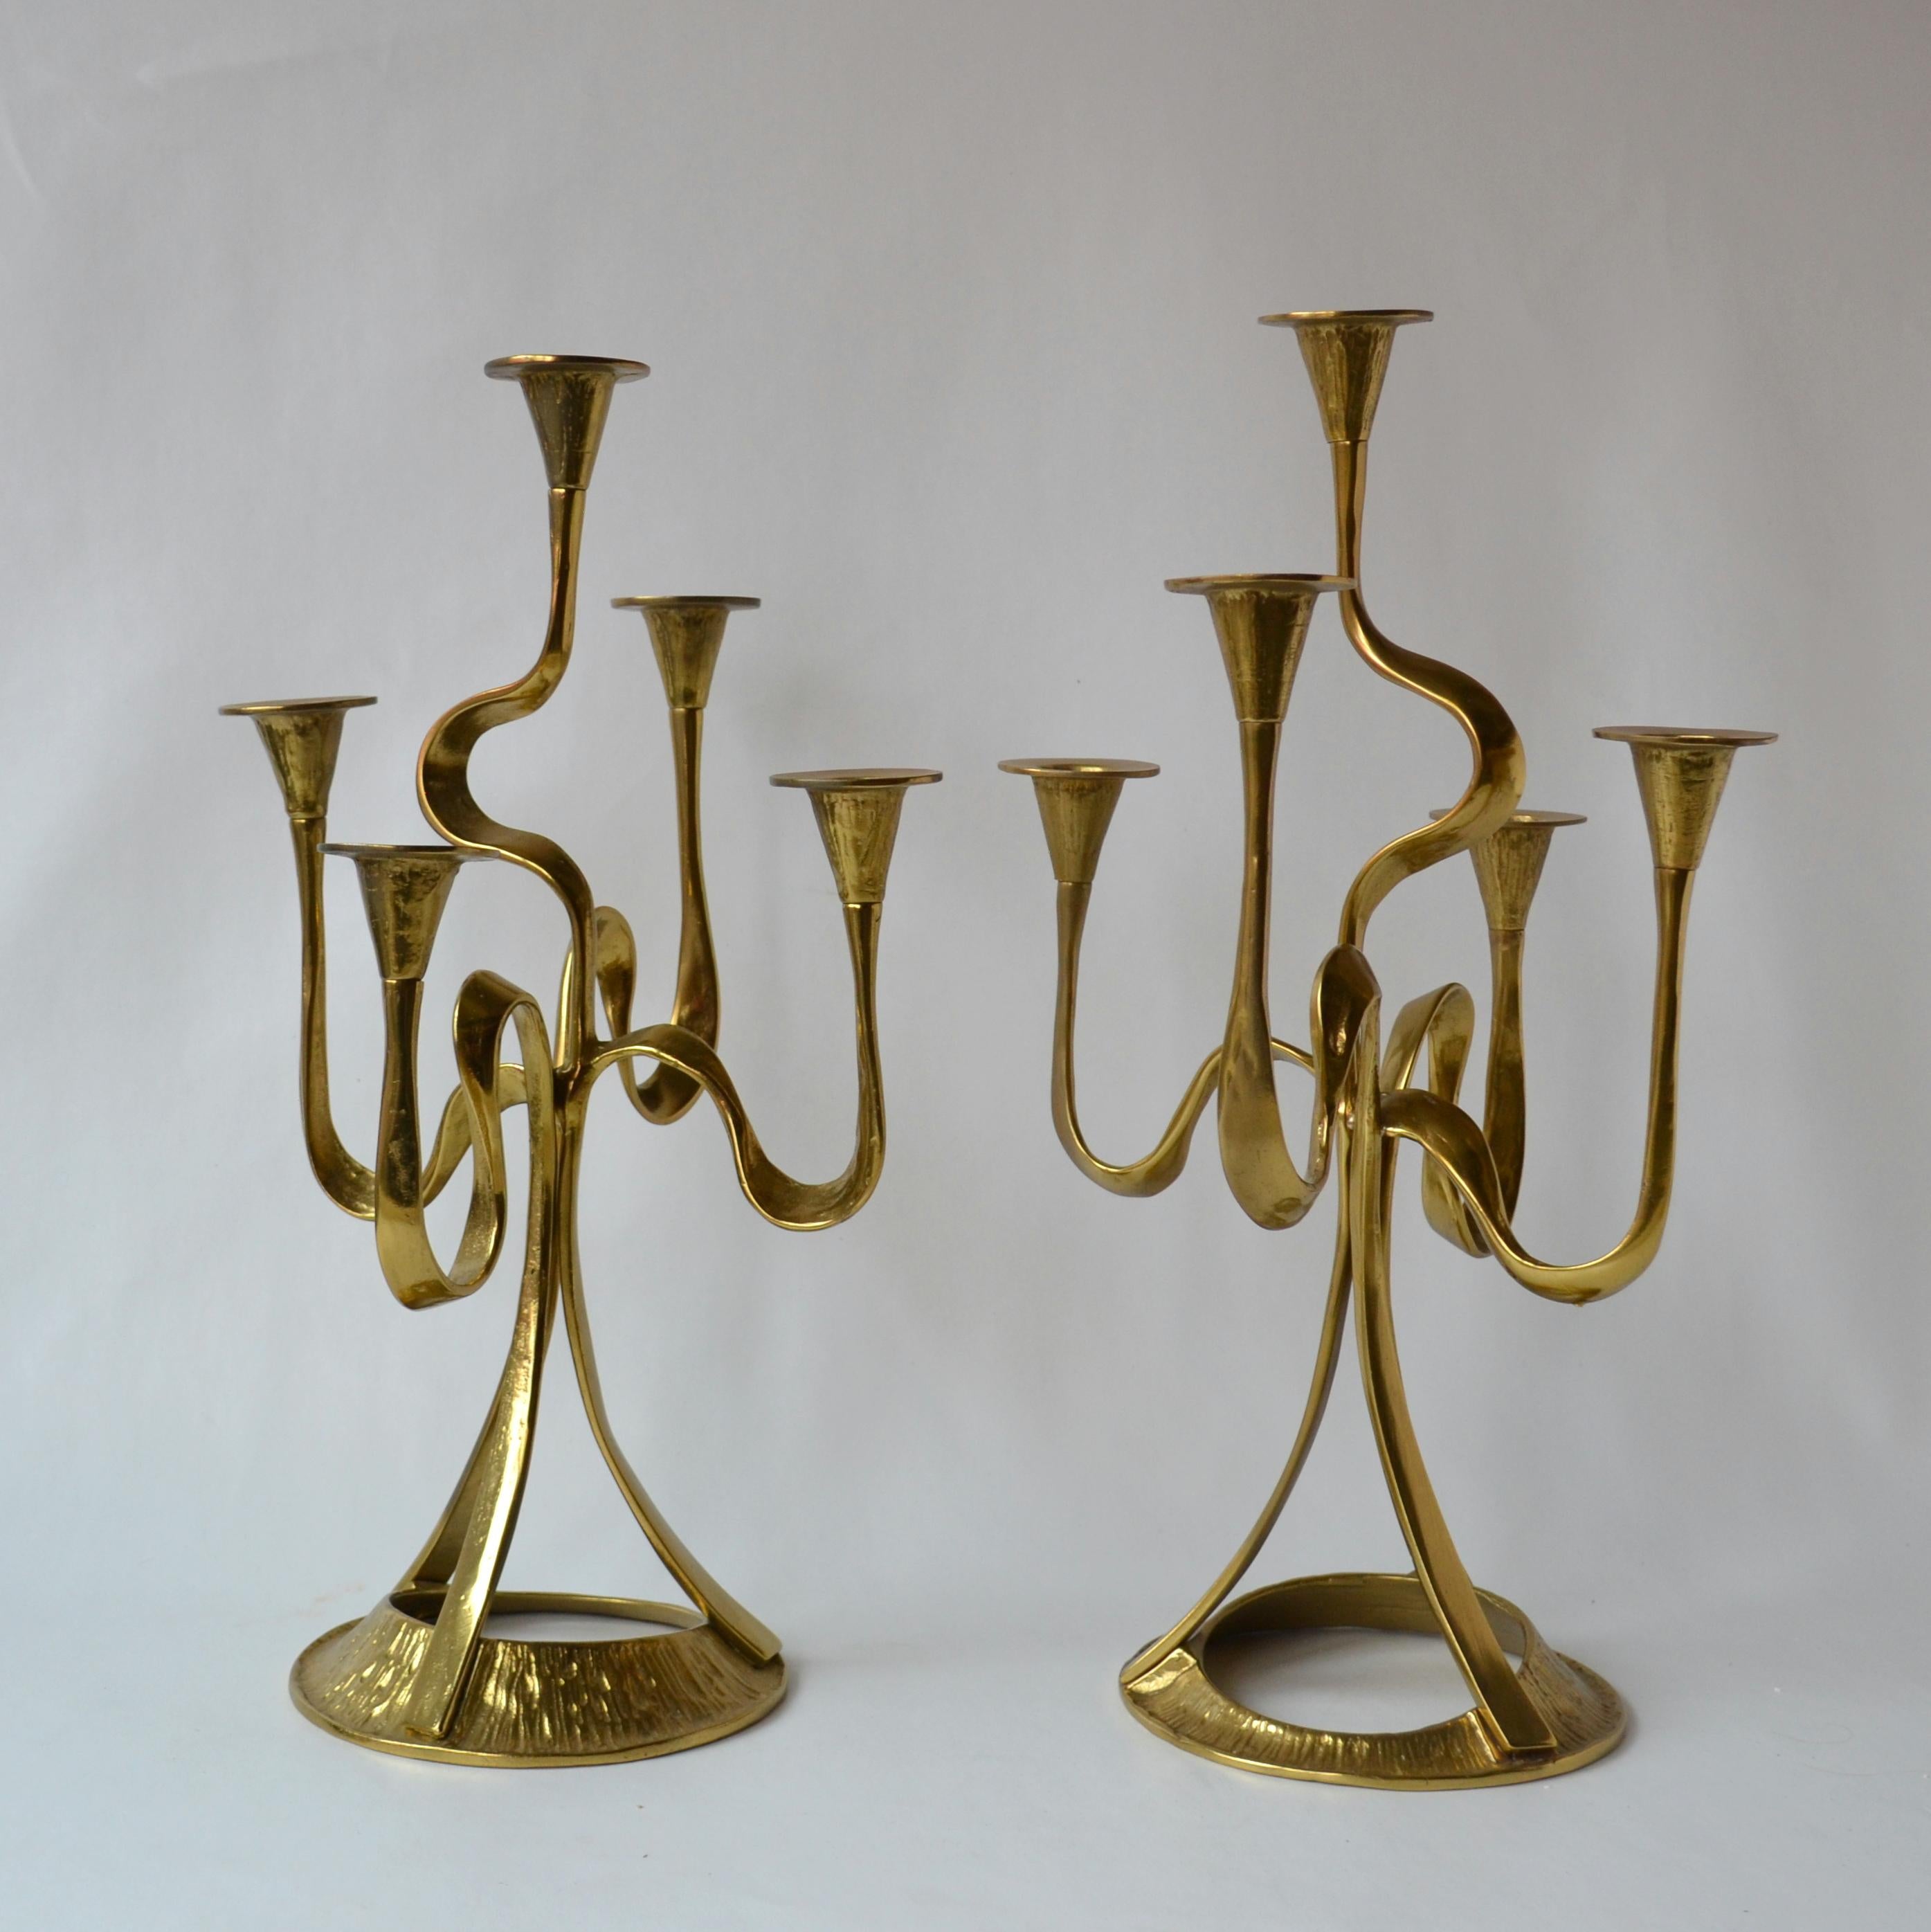 Two organic shaped ribbon form five-arm candelabra's cast in brass, swirling irregular arms link together on a sculptural round base evoking the Art Nouveau style. The candleholders have an irregular textural surface that catches the light. These